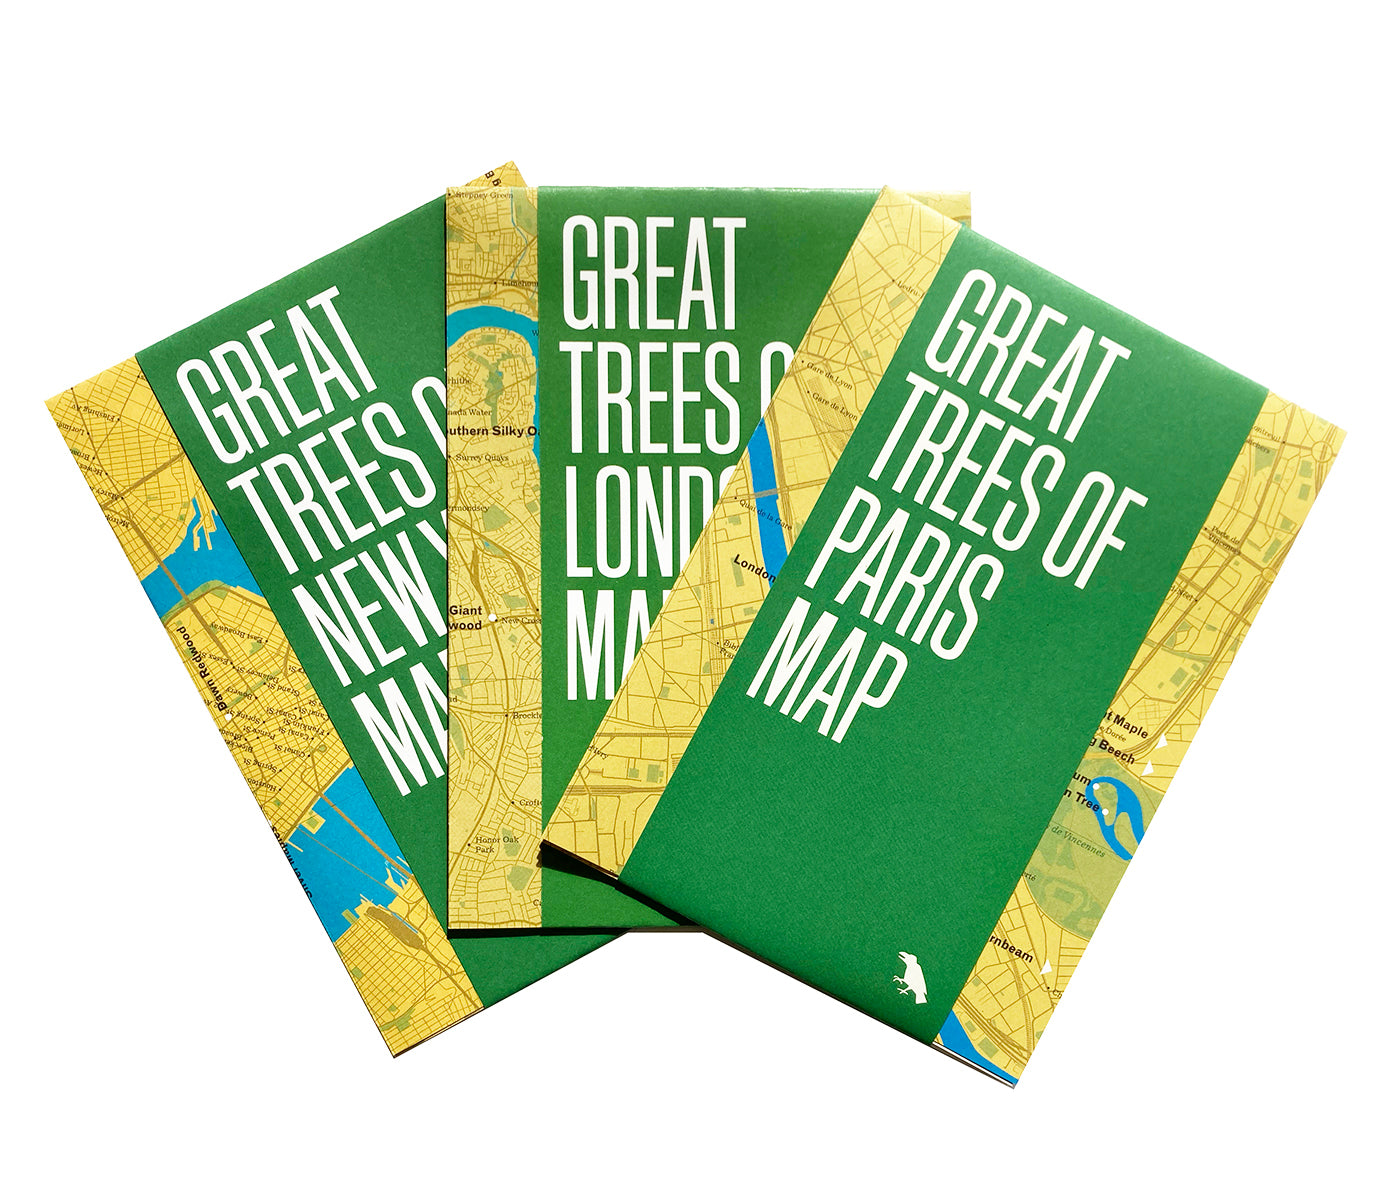 Great Trees Maps